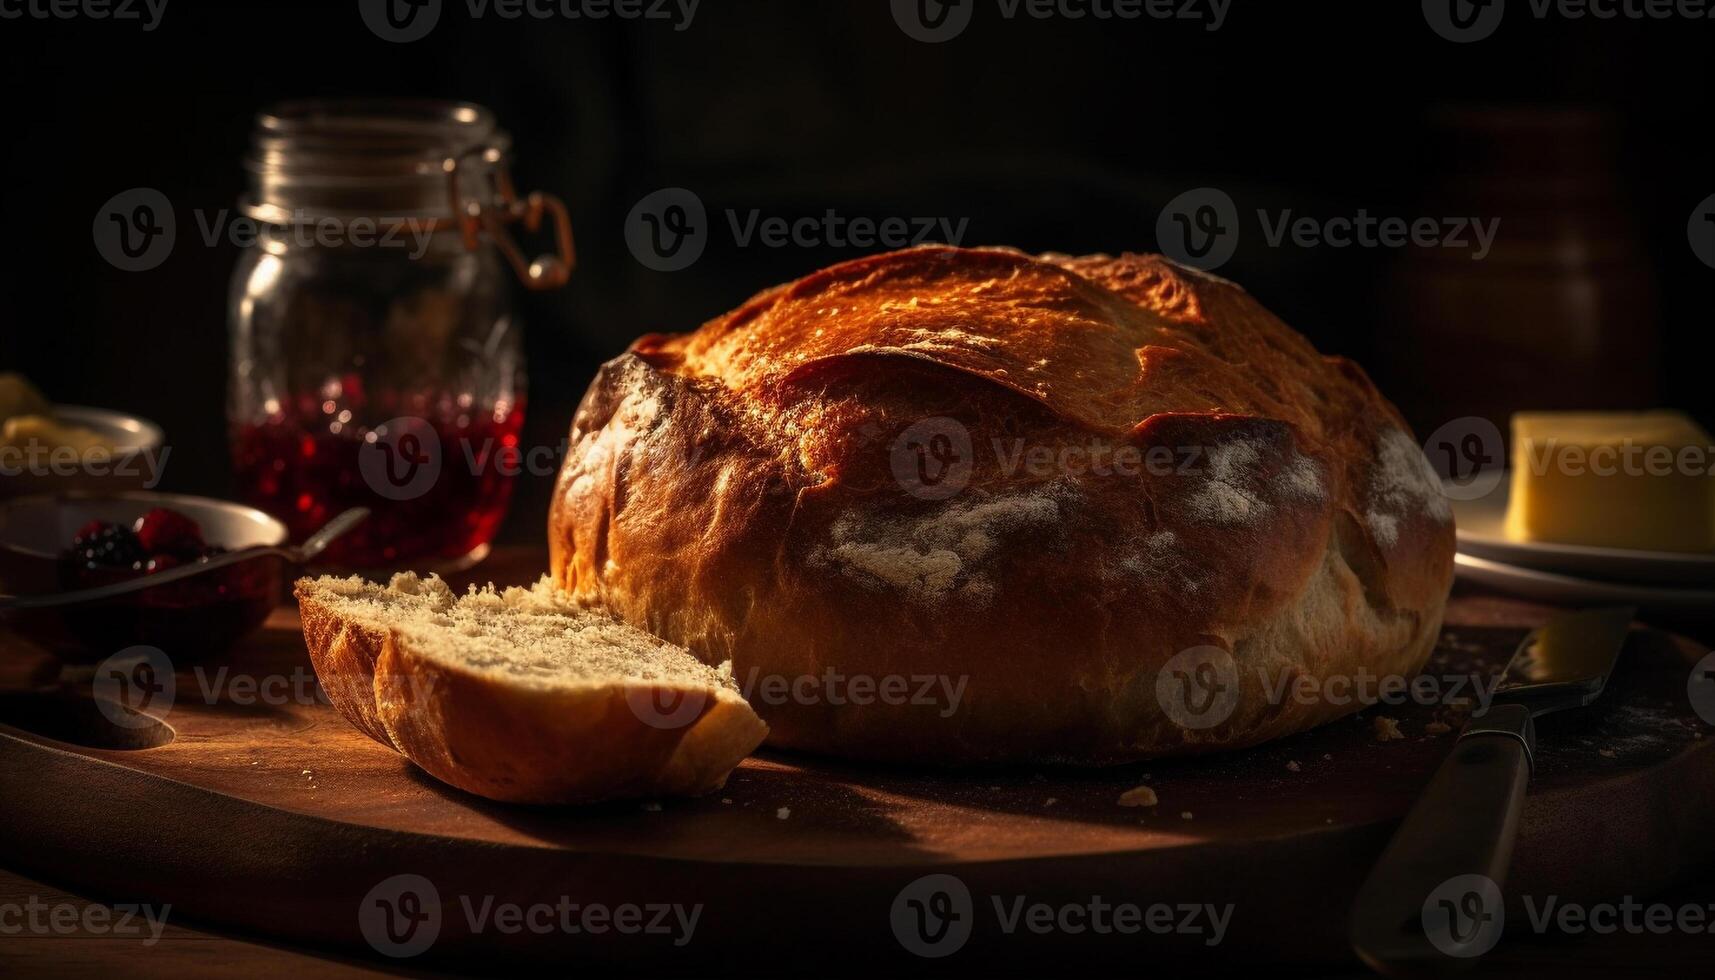 Freshly baked bread on rustic wooden table, ready to eat gourmet meal generated by AI photo